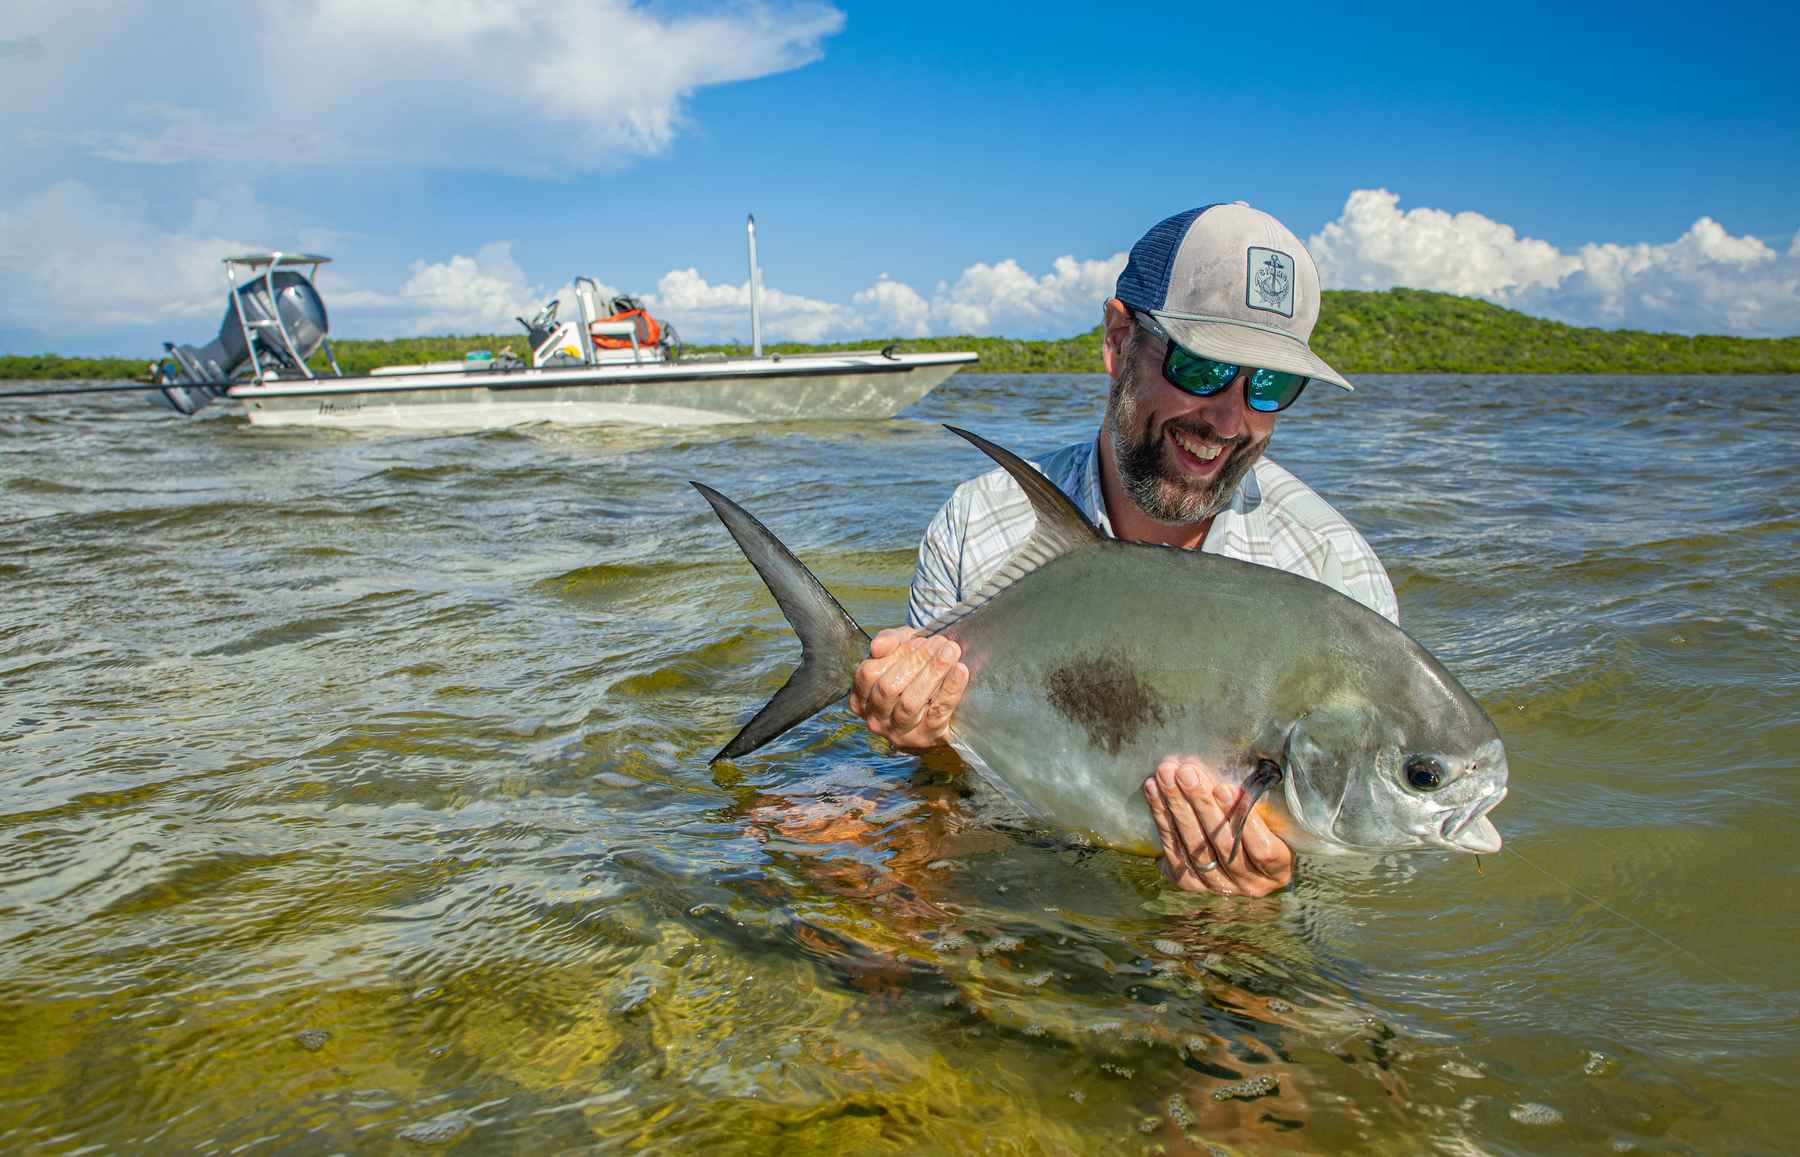 Is this the next great permit fishing destination?